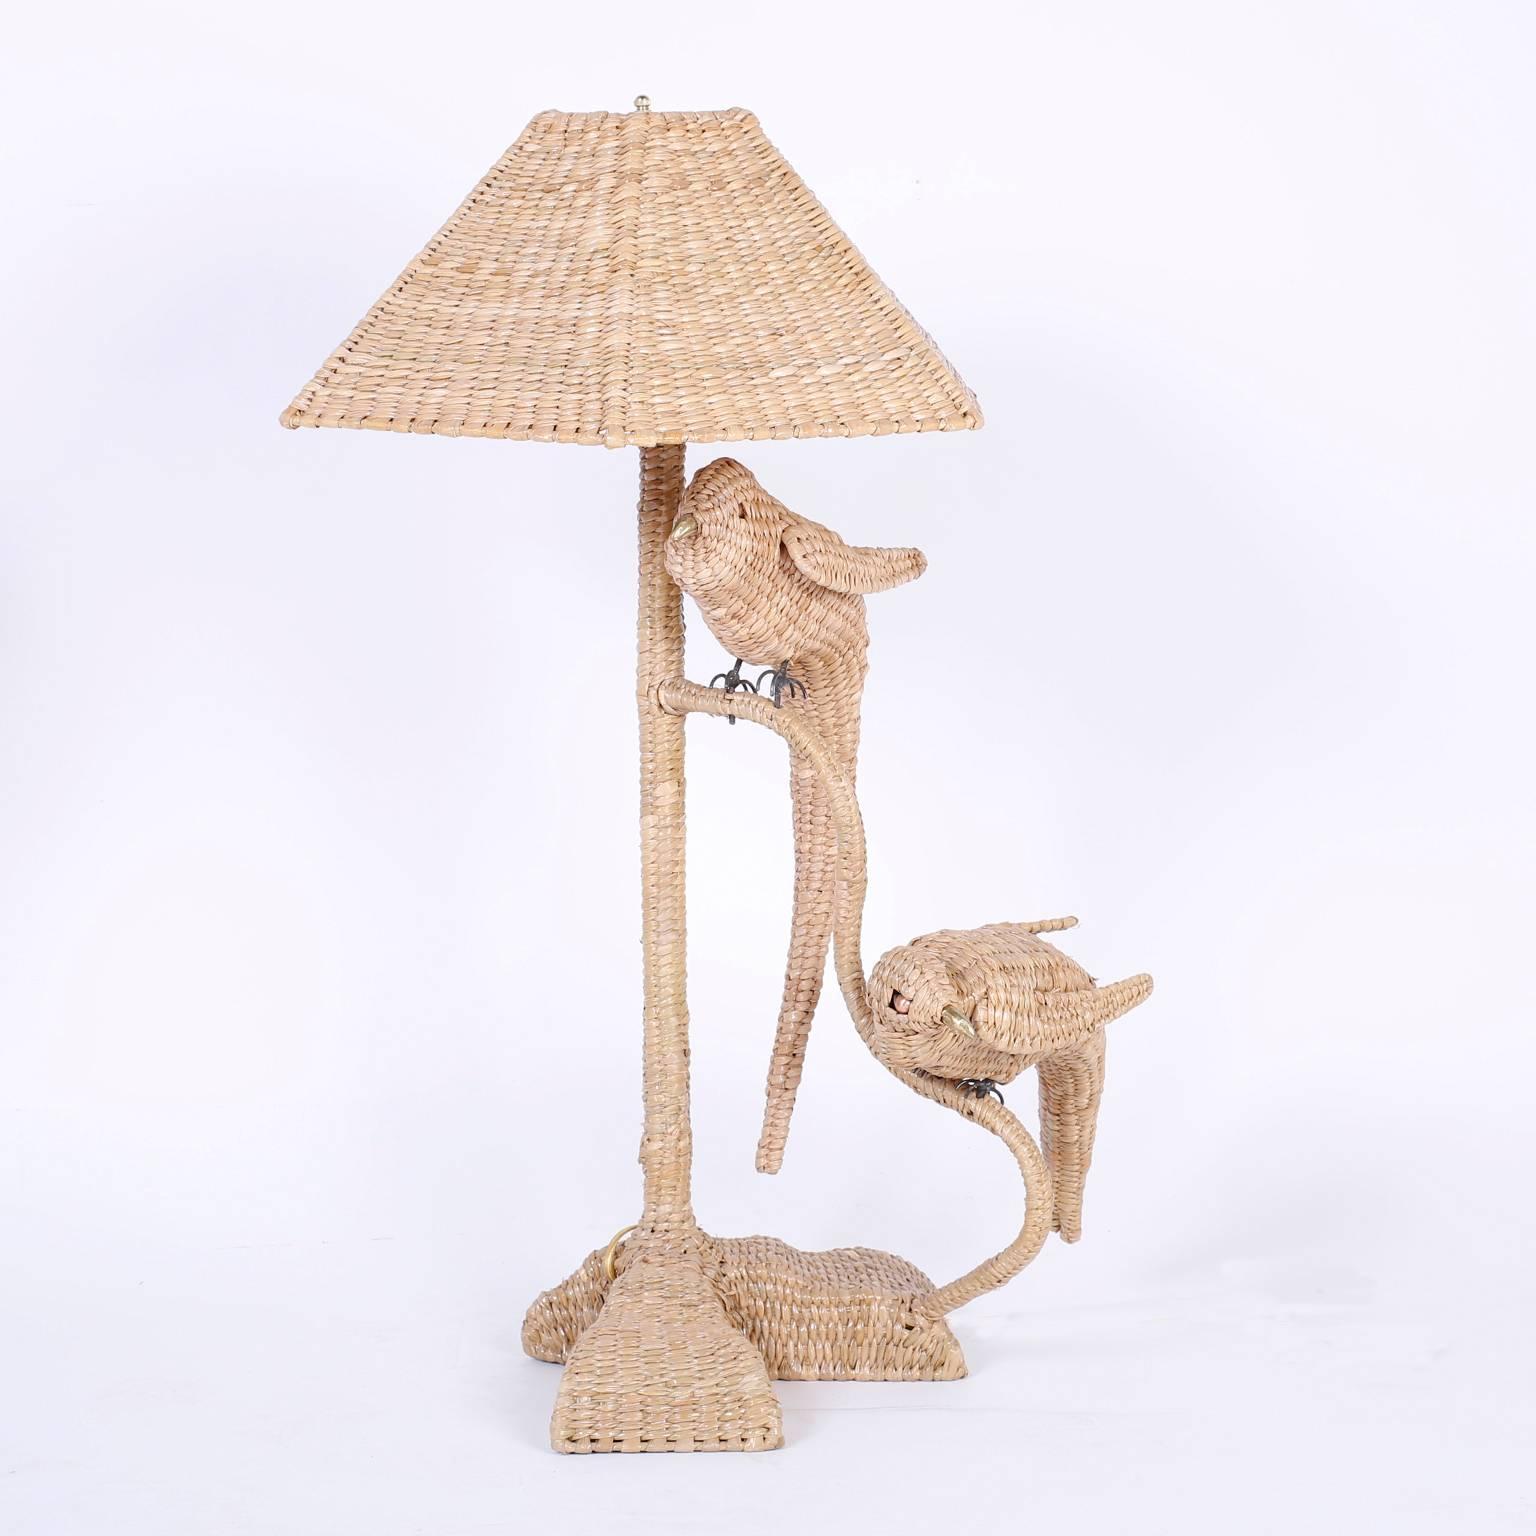 Pair of rustic modern wicker table lamps with two parrots on each, perched on a tree branch and your choice of a wicker or linen shade. Signed Mario Torres on a brass medallion. 

Measures: Height with wicker shade 34